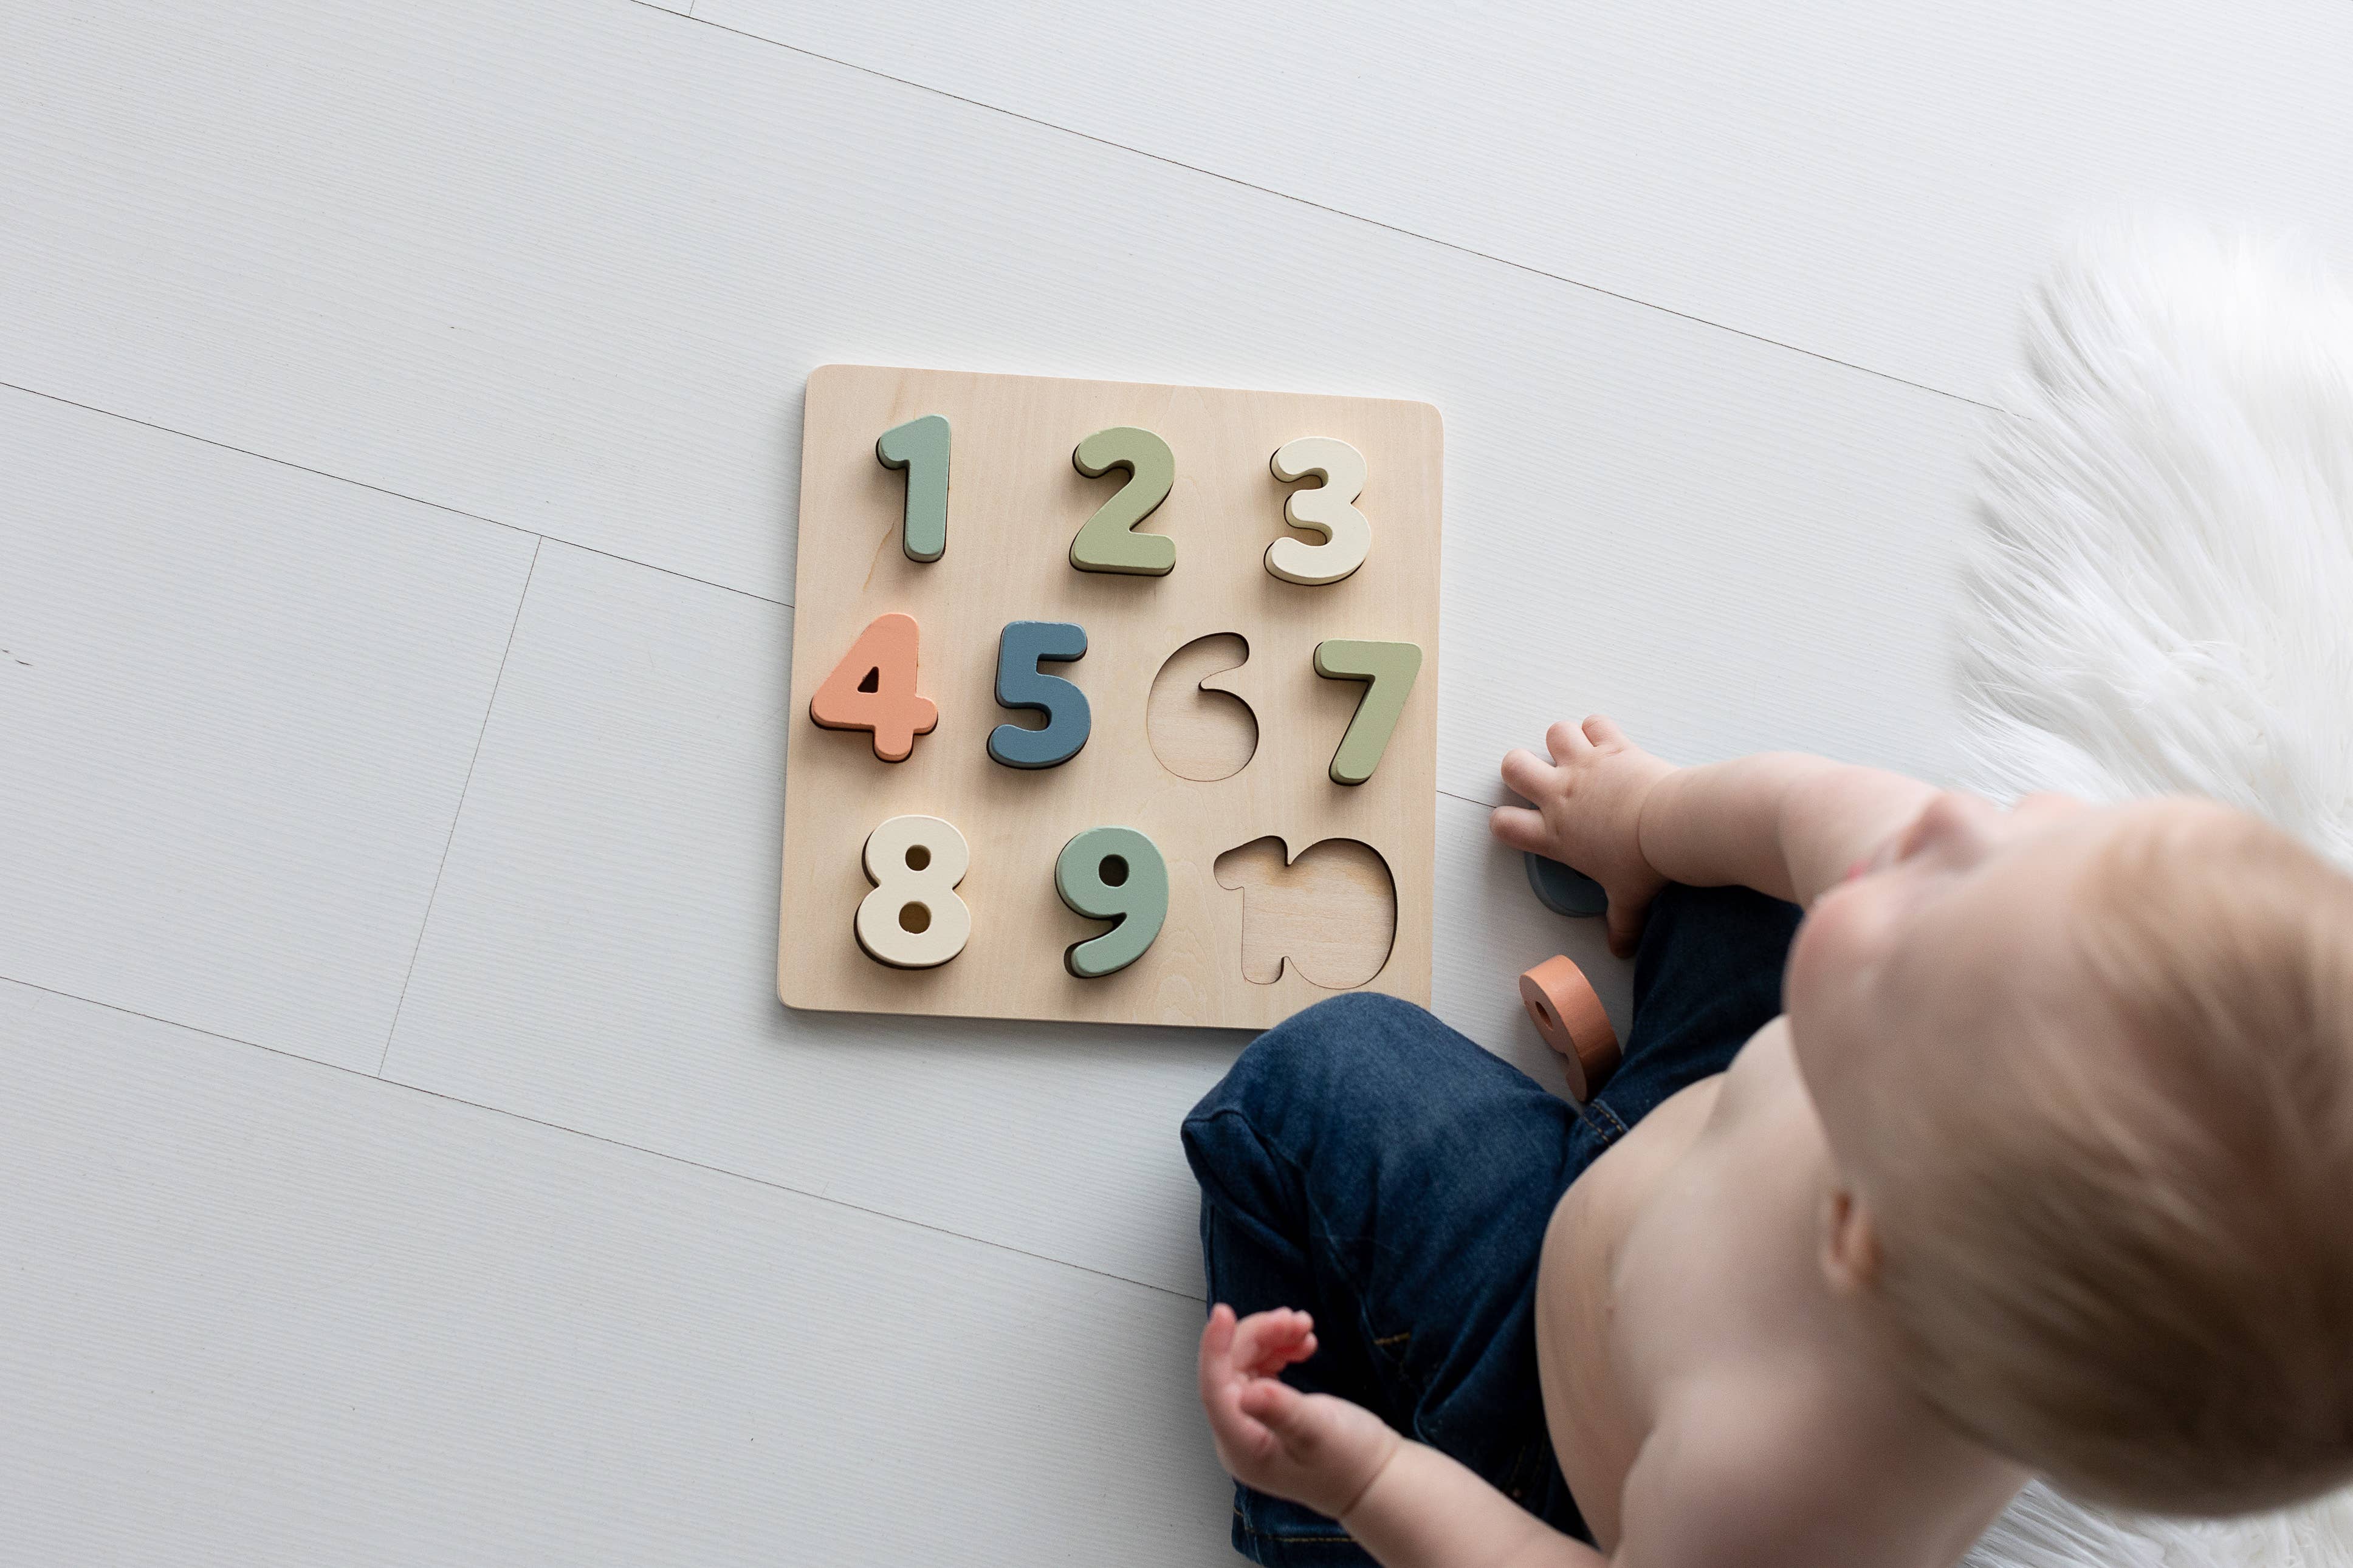 Wooden Numbers Puzzle, Nursery Decor